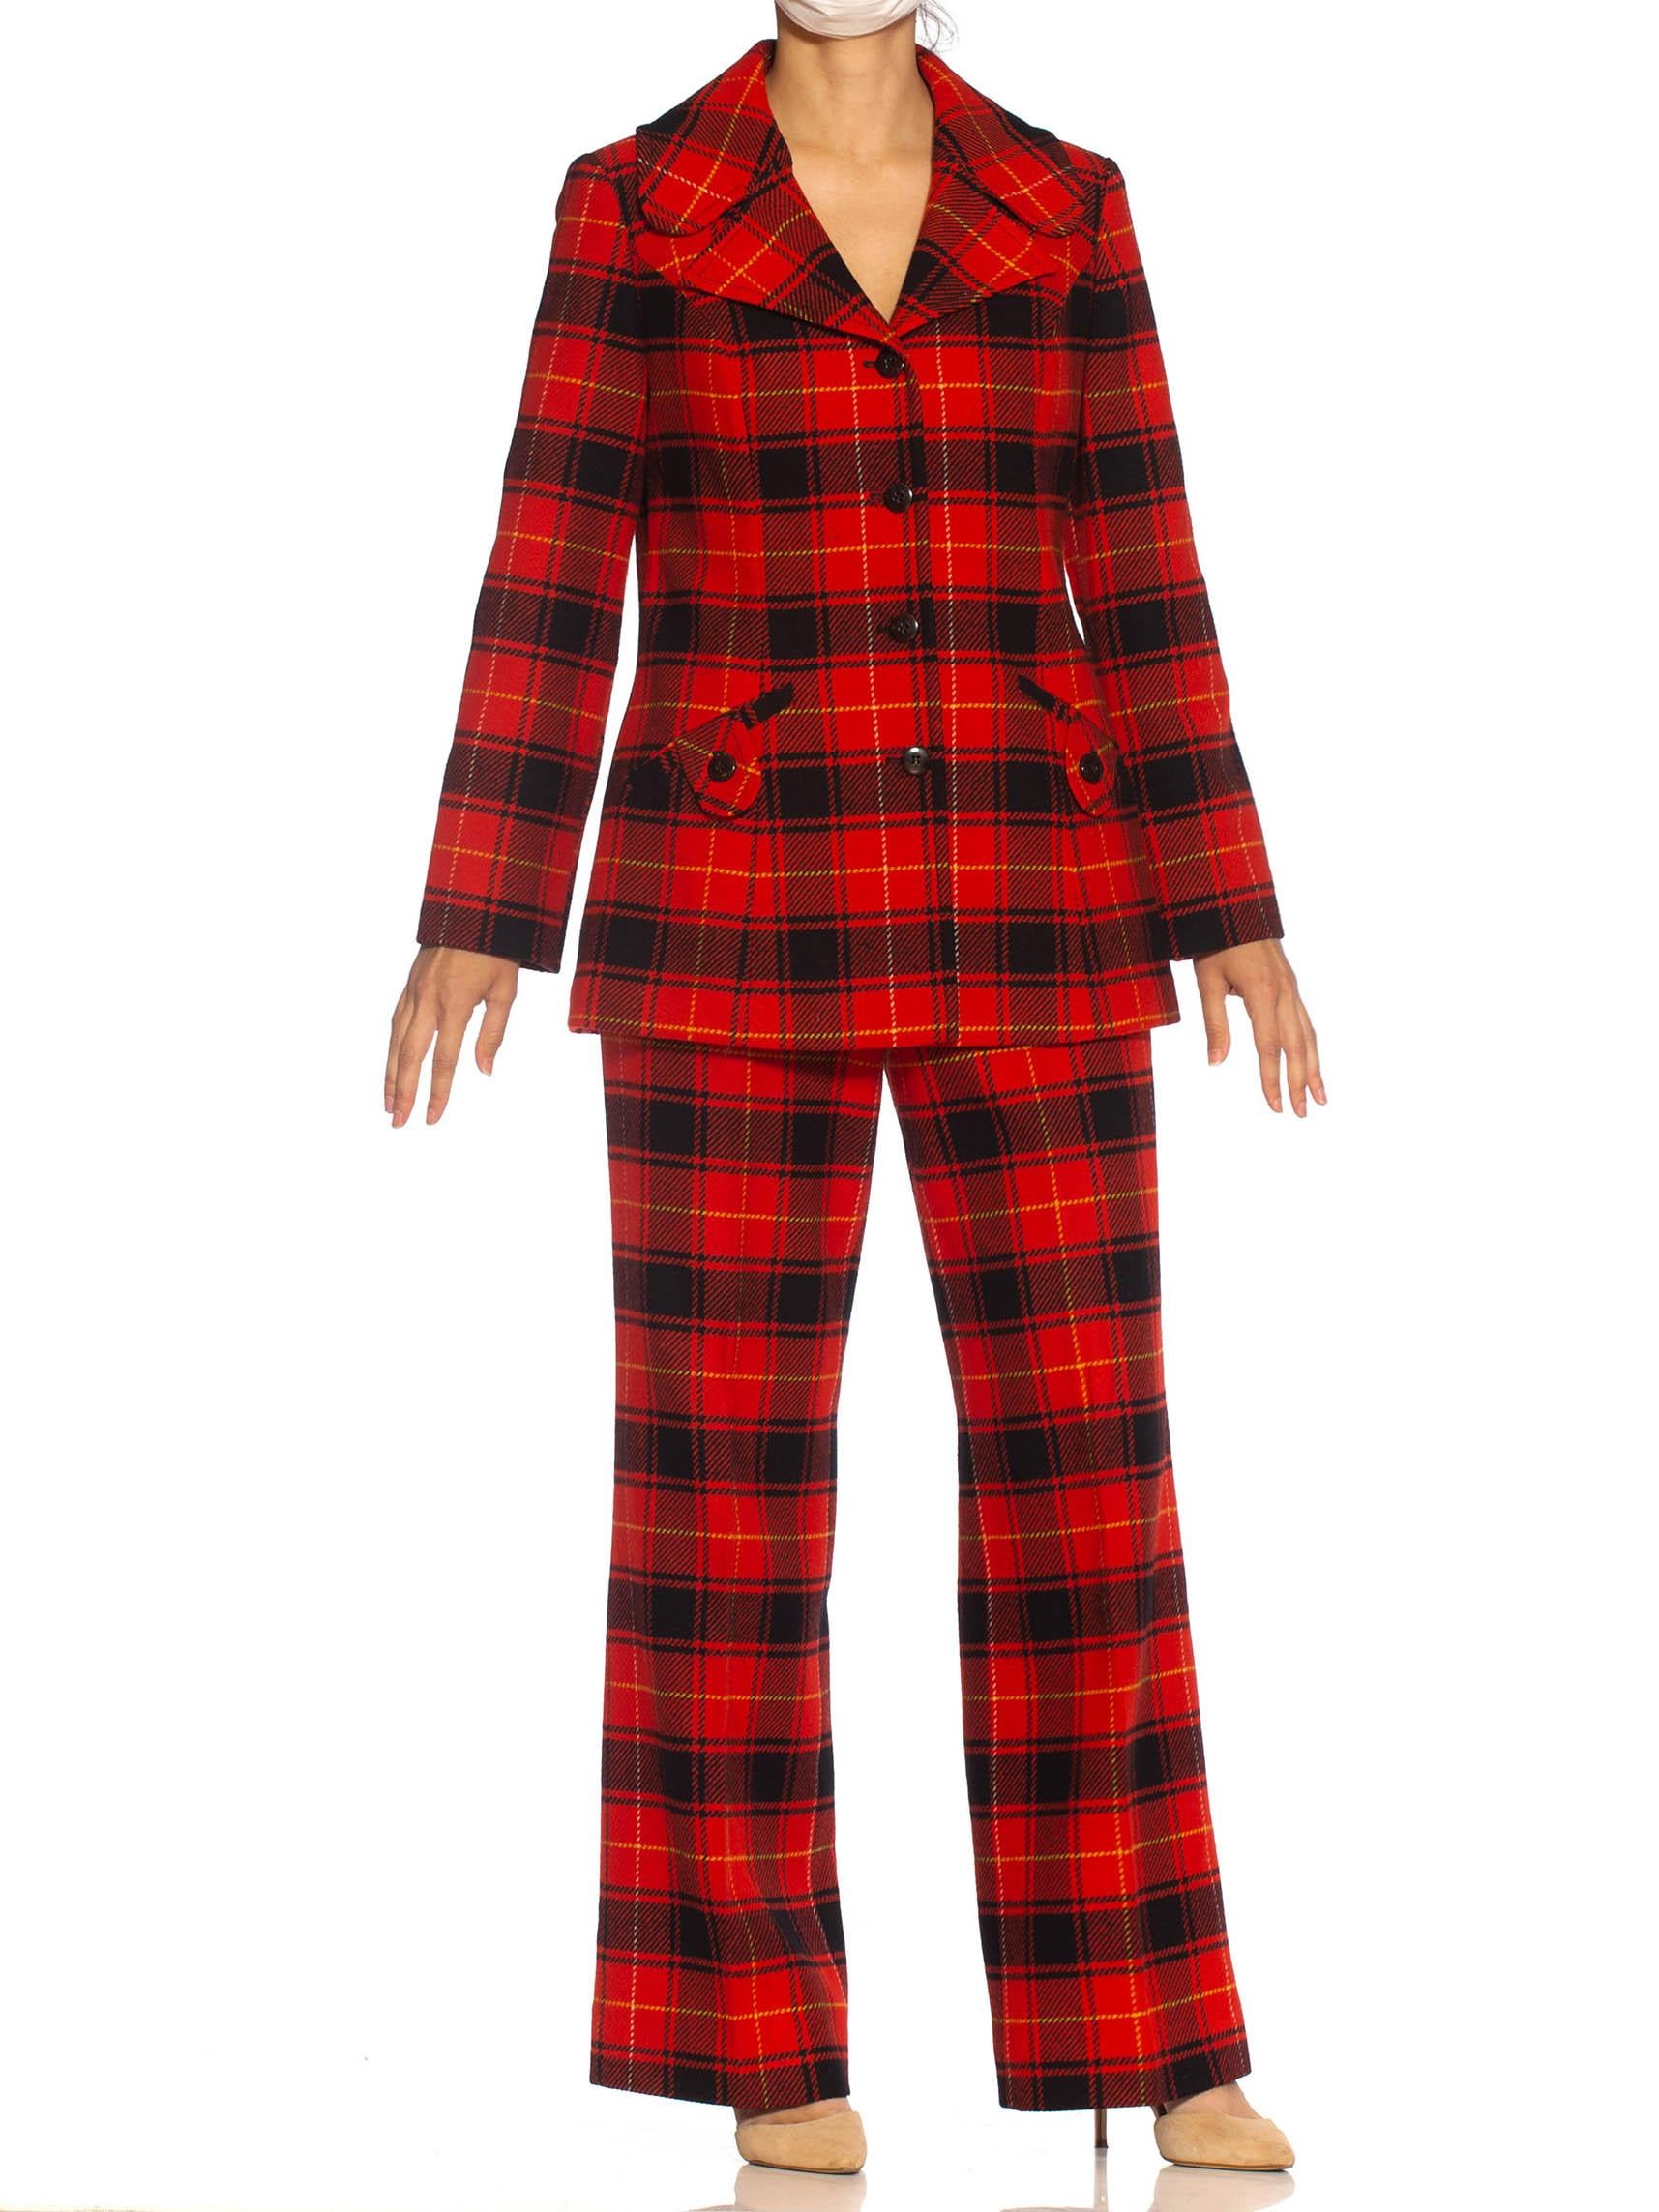 Women's 1960S PENDLETON Red & Black Plaid Wool Fully Lined, Wide Lapel Pant Suit For Sale